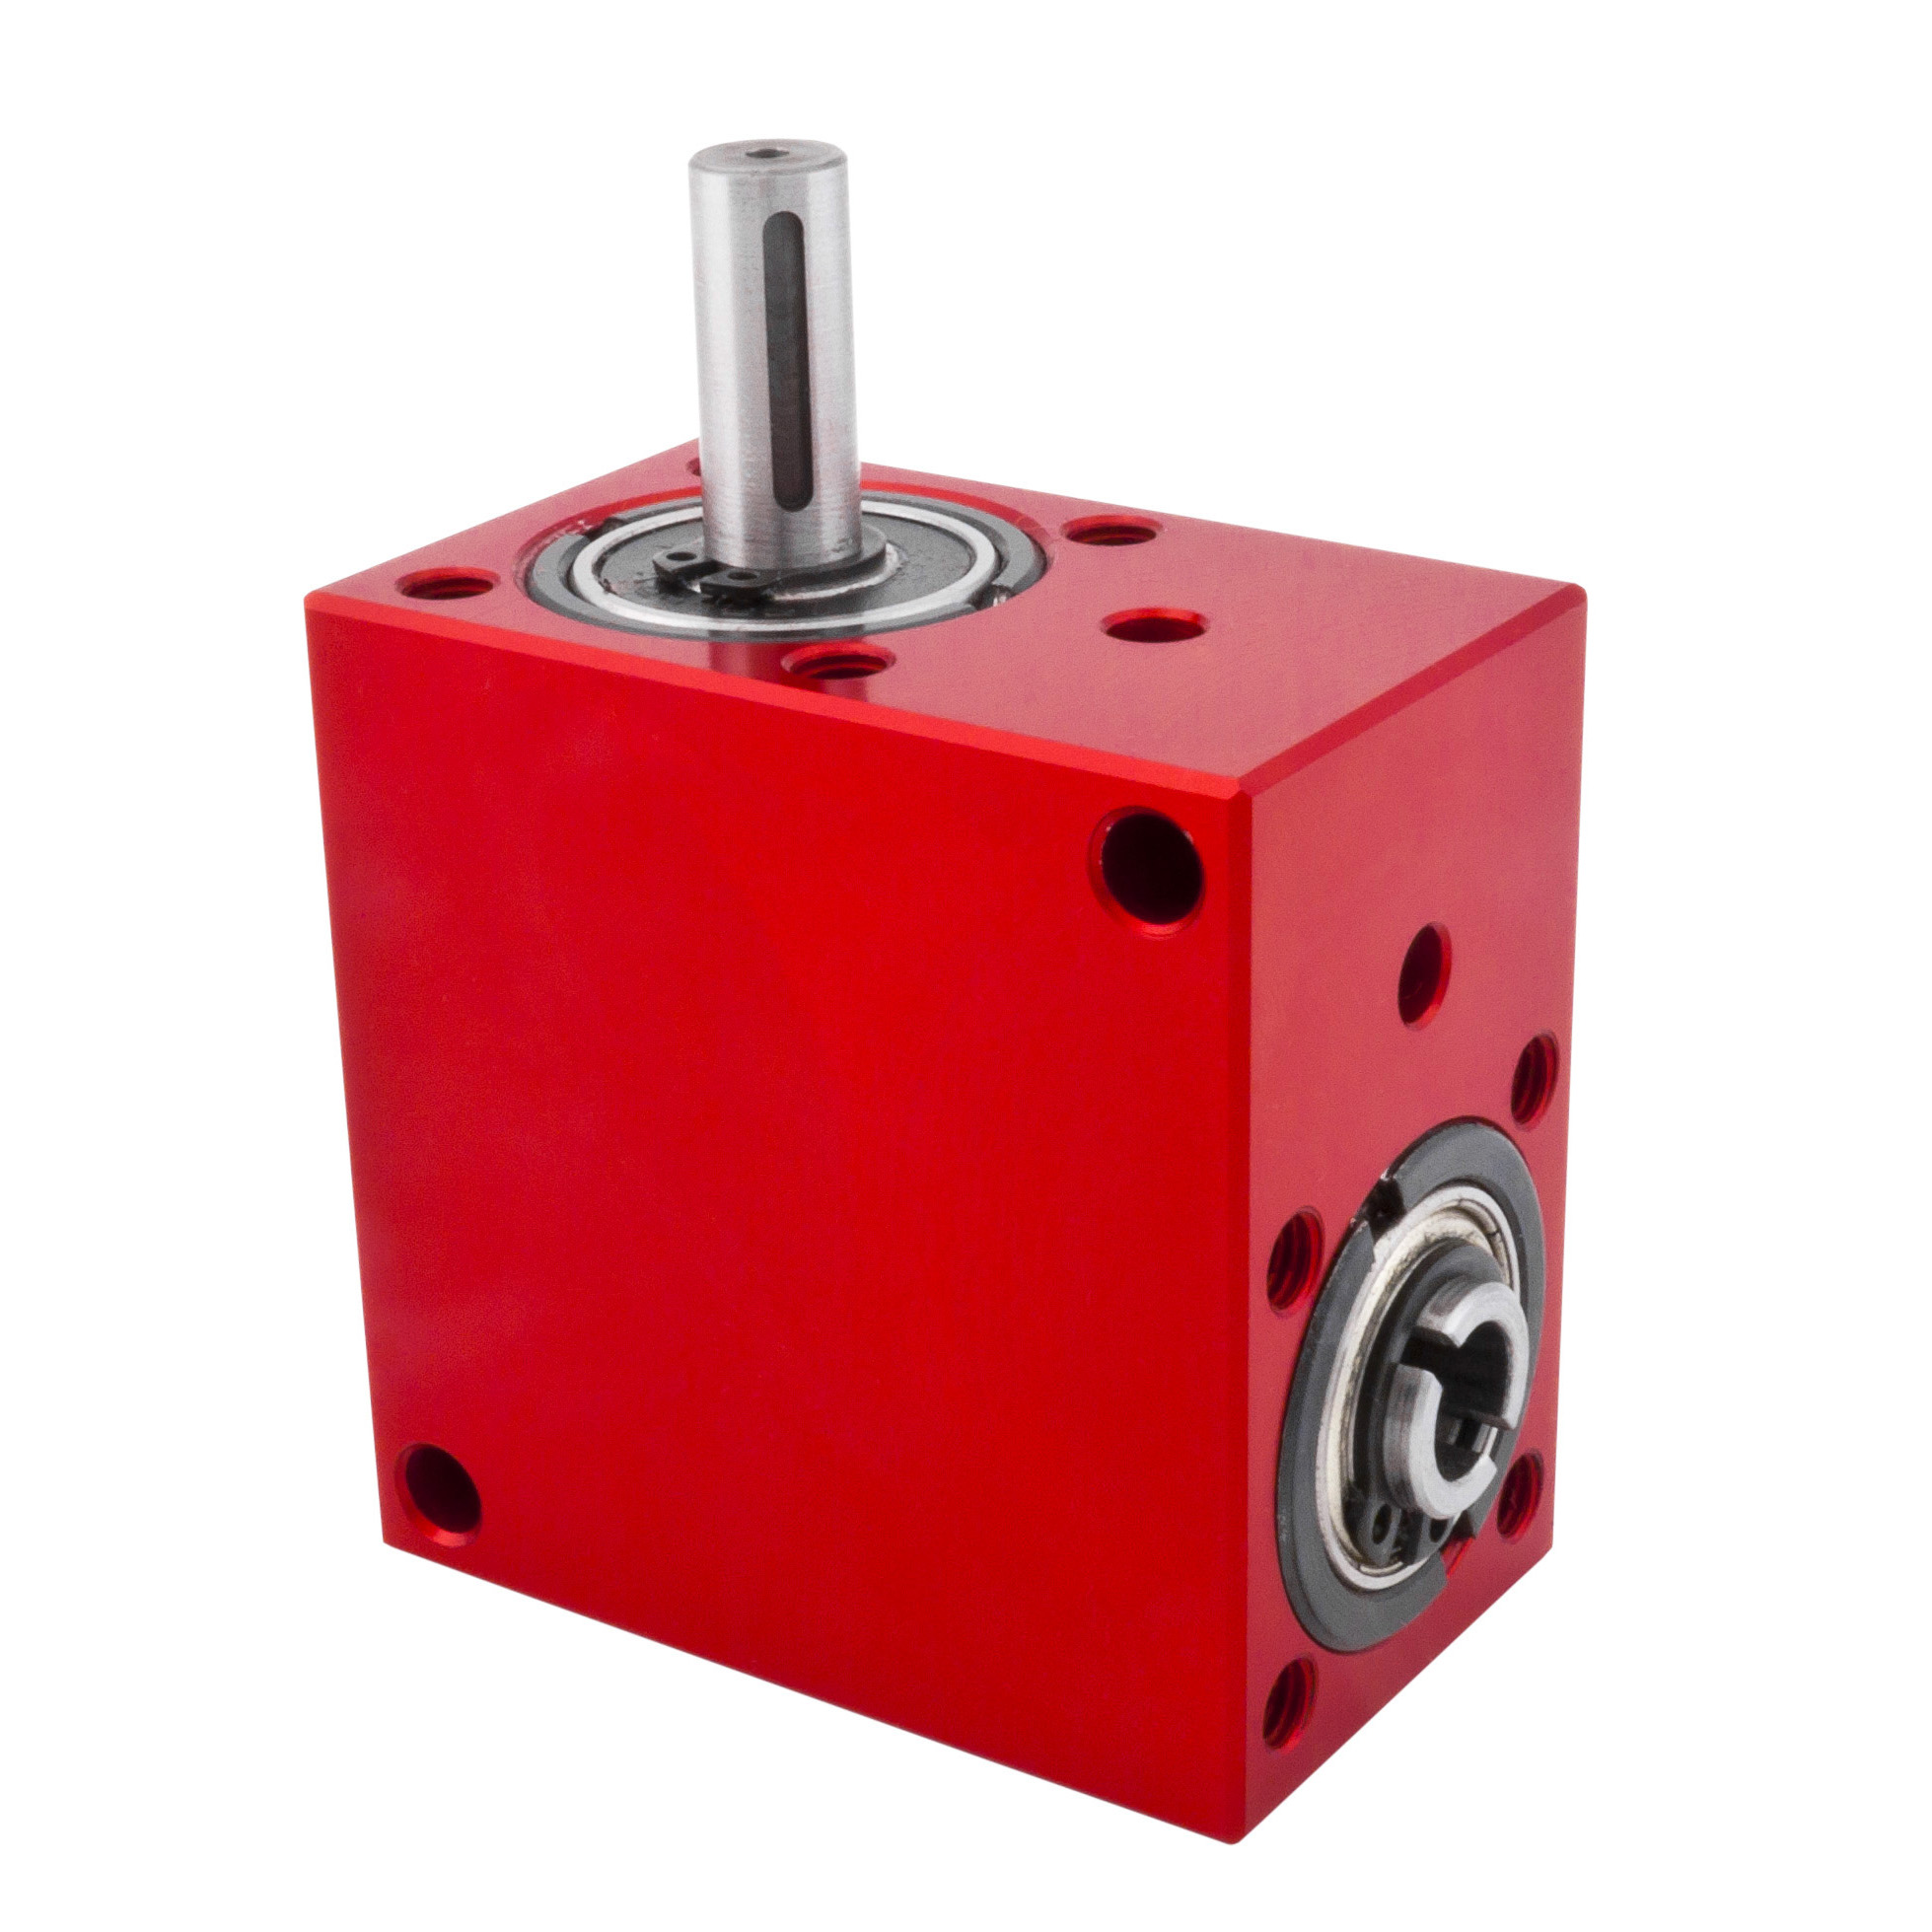 Right angled gearbox, bored shafts - up to 1.77 Nm - 1 bored shaft/1 solid shaft - 3000rpm